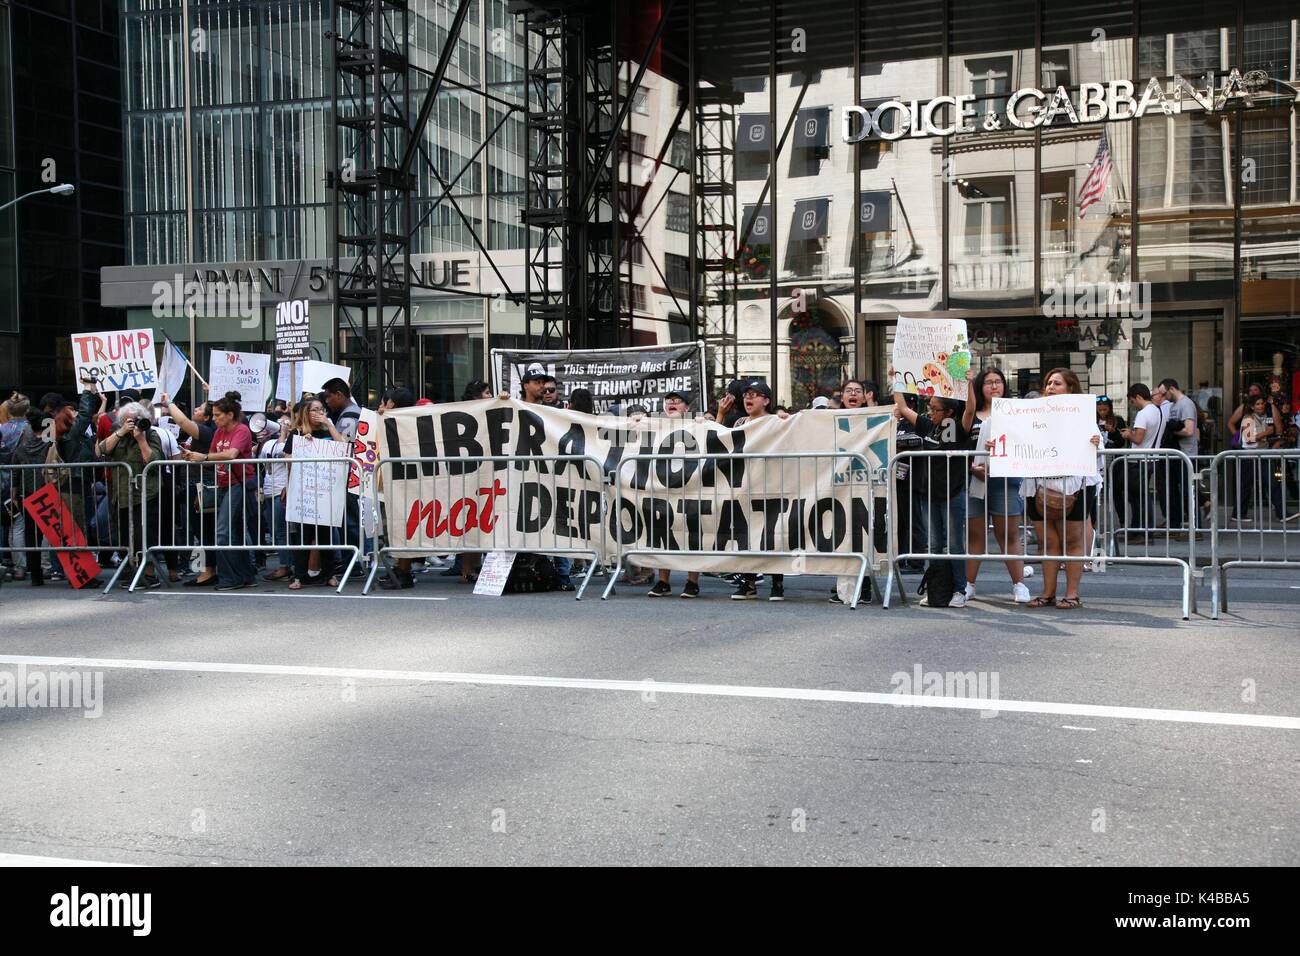 New York, Us. 05th Sep, 2017. Hundreds of immigrants who came to the USA illegally as children gathered outside Trump Tower on 5th September, 2017, to protest US President Donald Trump's decision to rescind the Deferred Action for Childhood Arrivals (DACA), a program designed to protect immigrants created by President Barack Obama in 2012. There were several arrests when demonstrators linked hands and formed a human chain that blocked traffic along 56th Street and Fifth Avenue in front of Trump Towers. Credit: G. Ronald Lopez /DigiPixsAgain.us/Alamy Live News Stock Photo